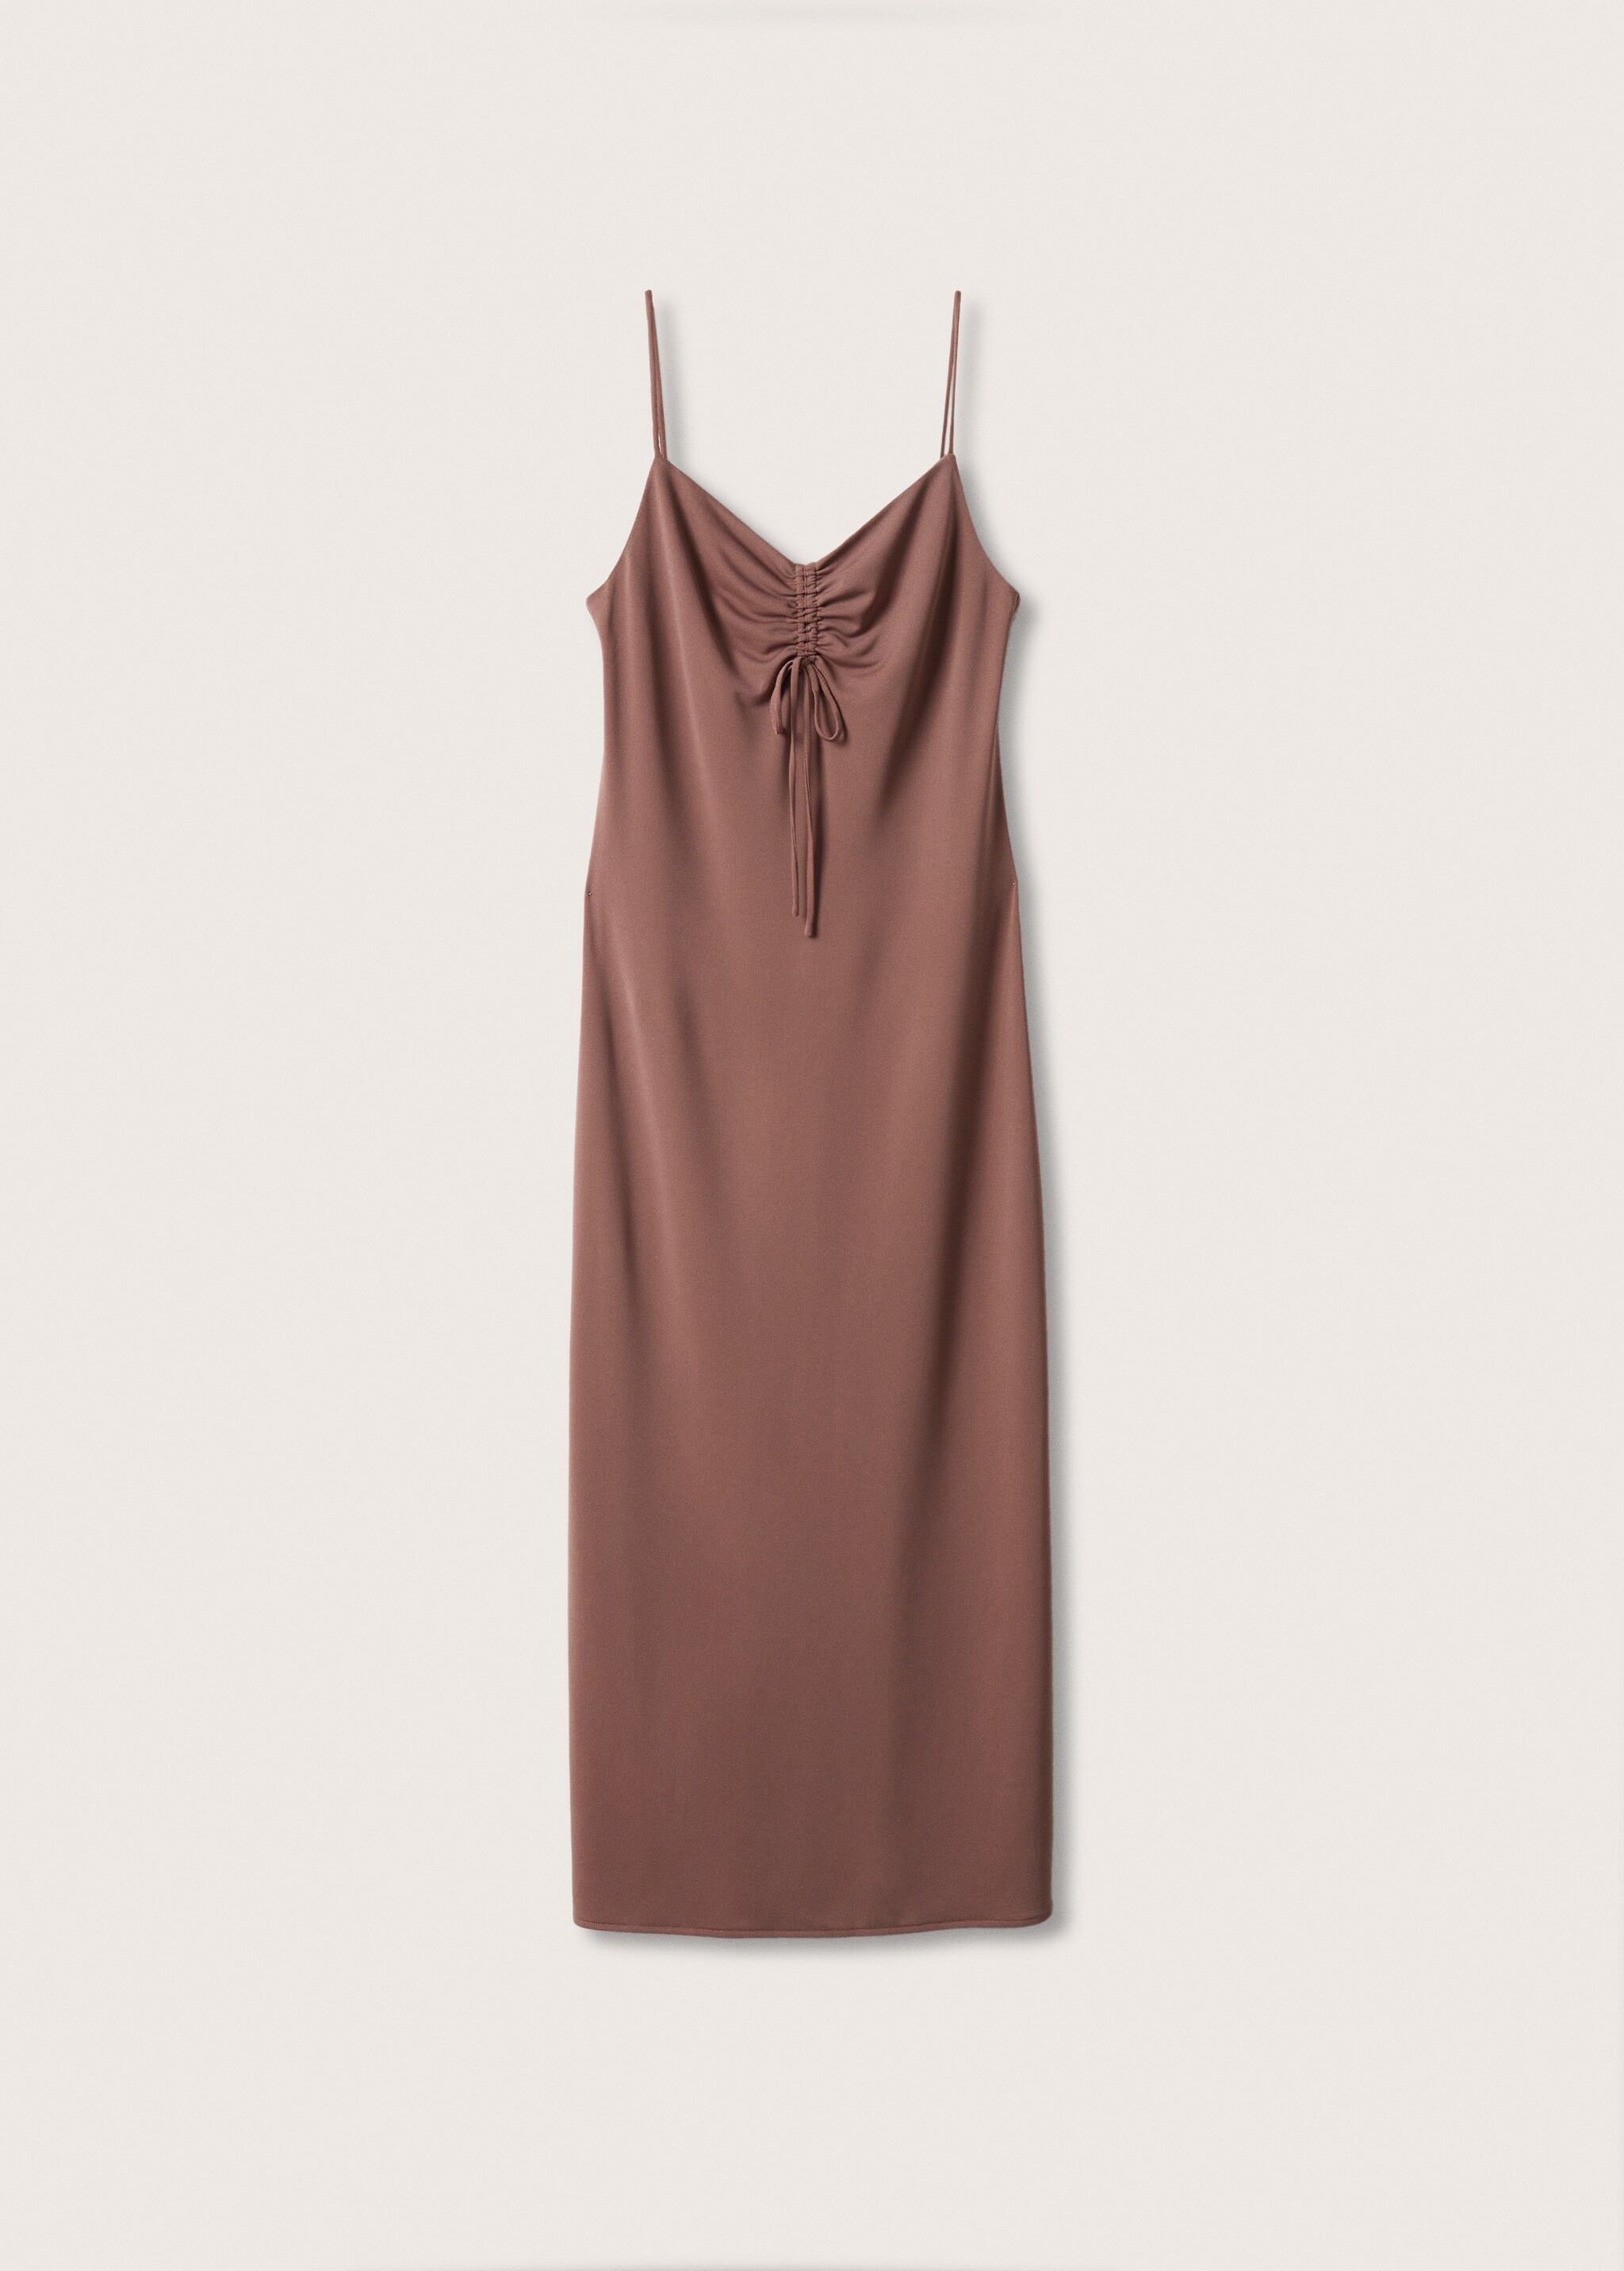 Gathered neckline dress - Article without model